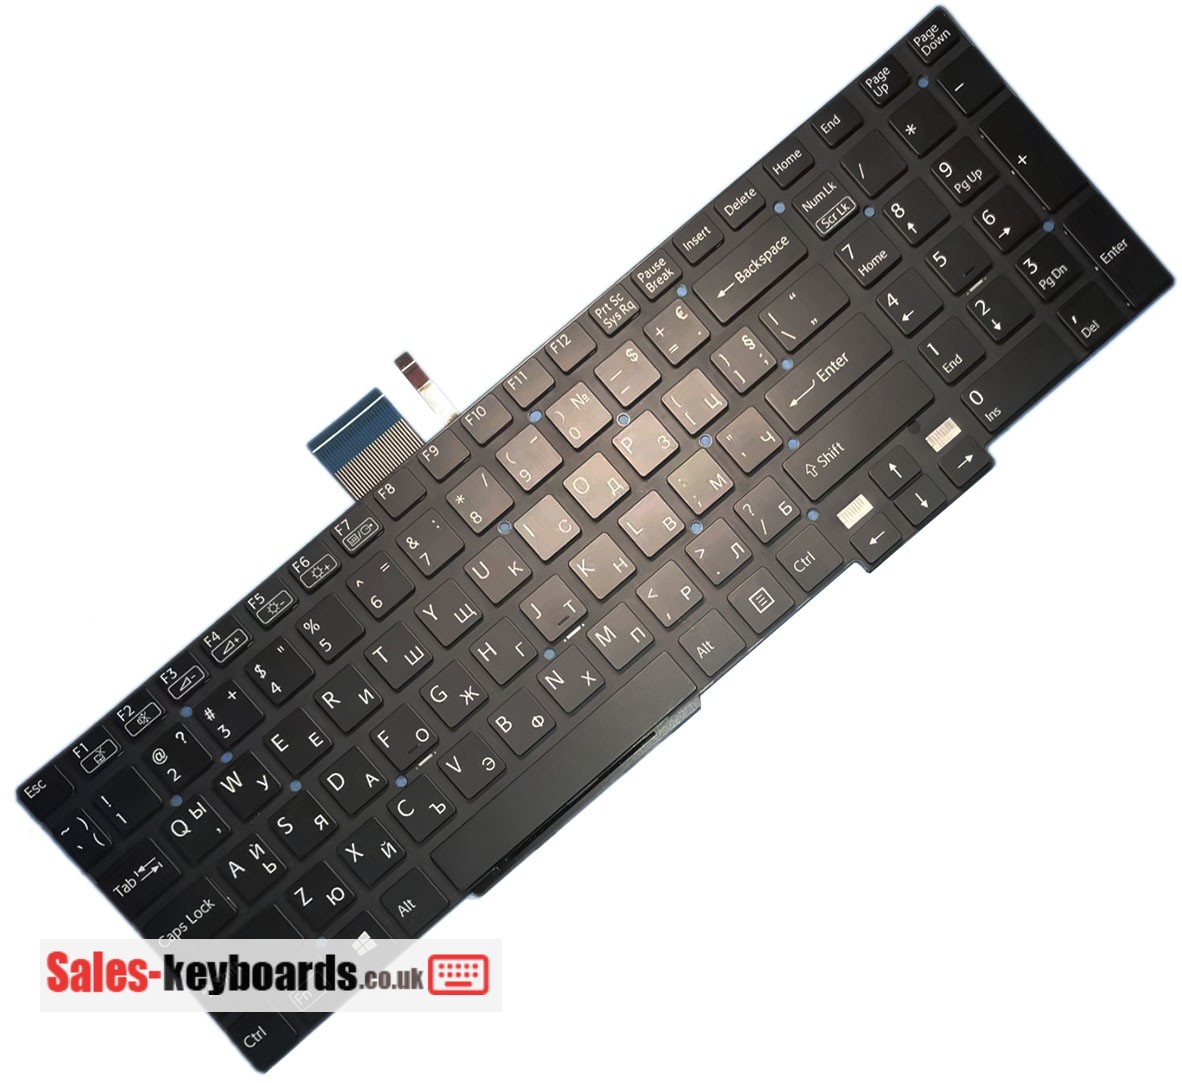 Sony VAIO SVT1511C5E Keyboard replacement